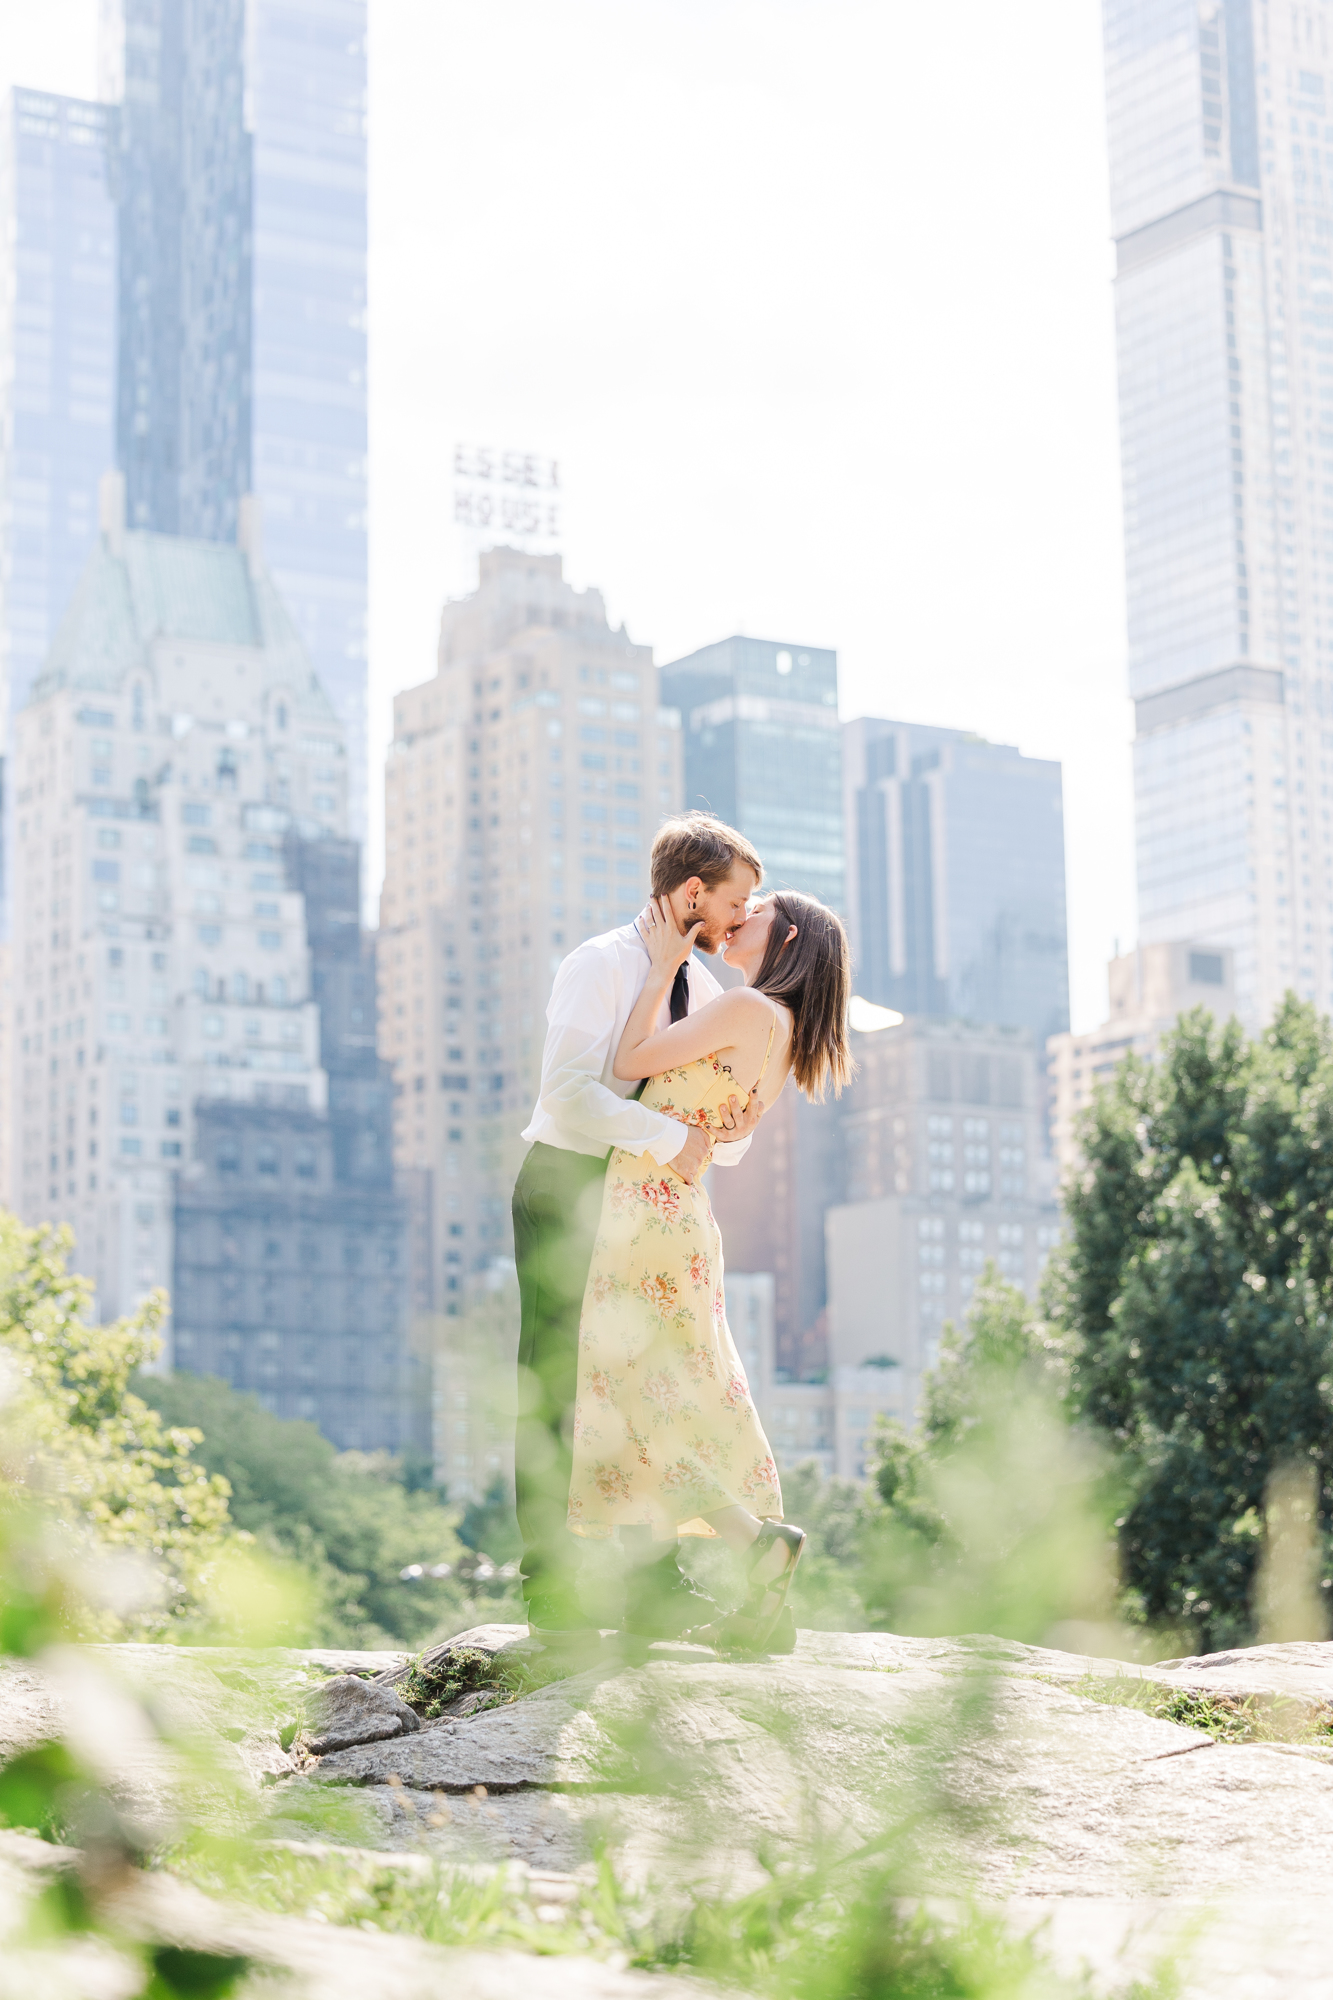 Fun Central Park Elopement in the Summertime